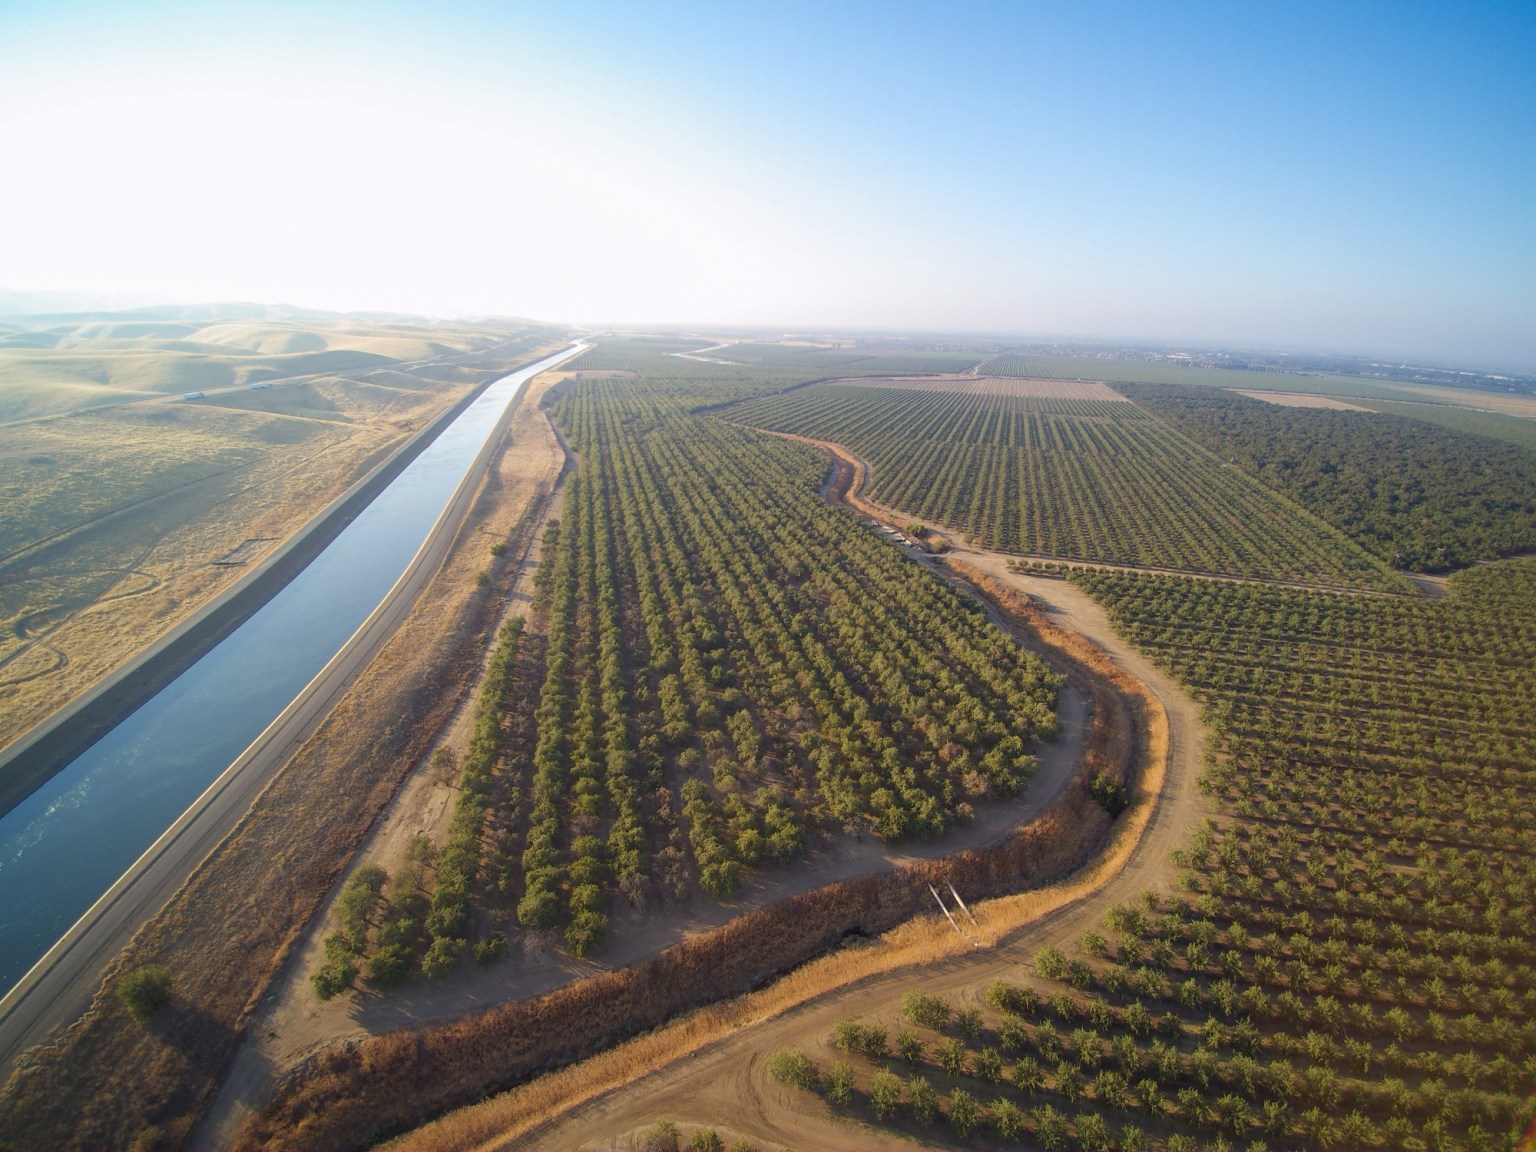 The importance of California’s agricultural water supplies